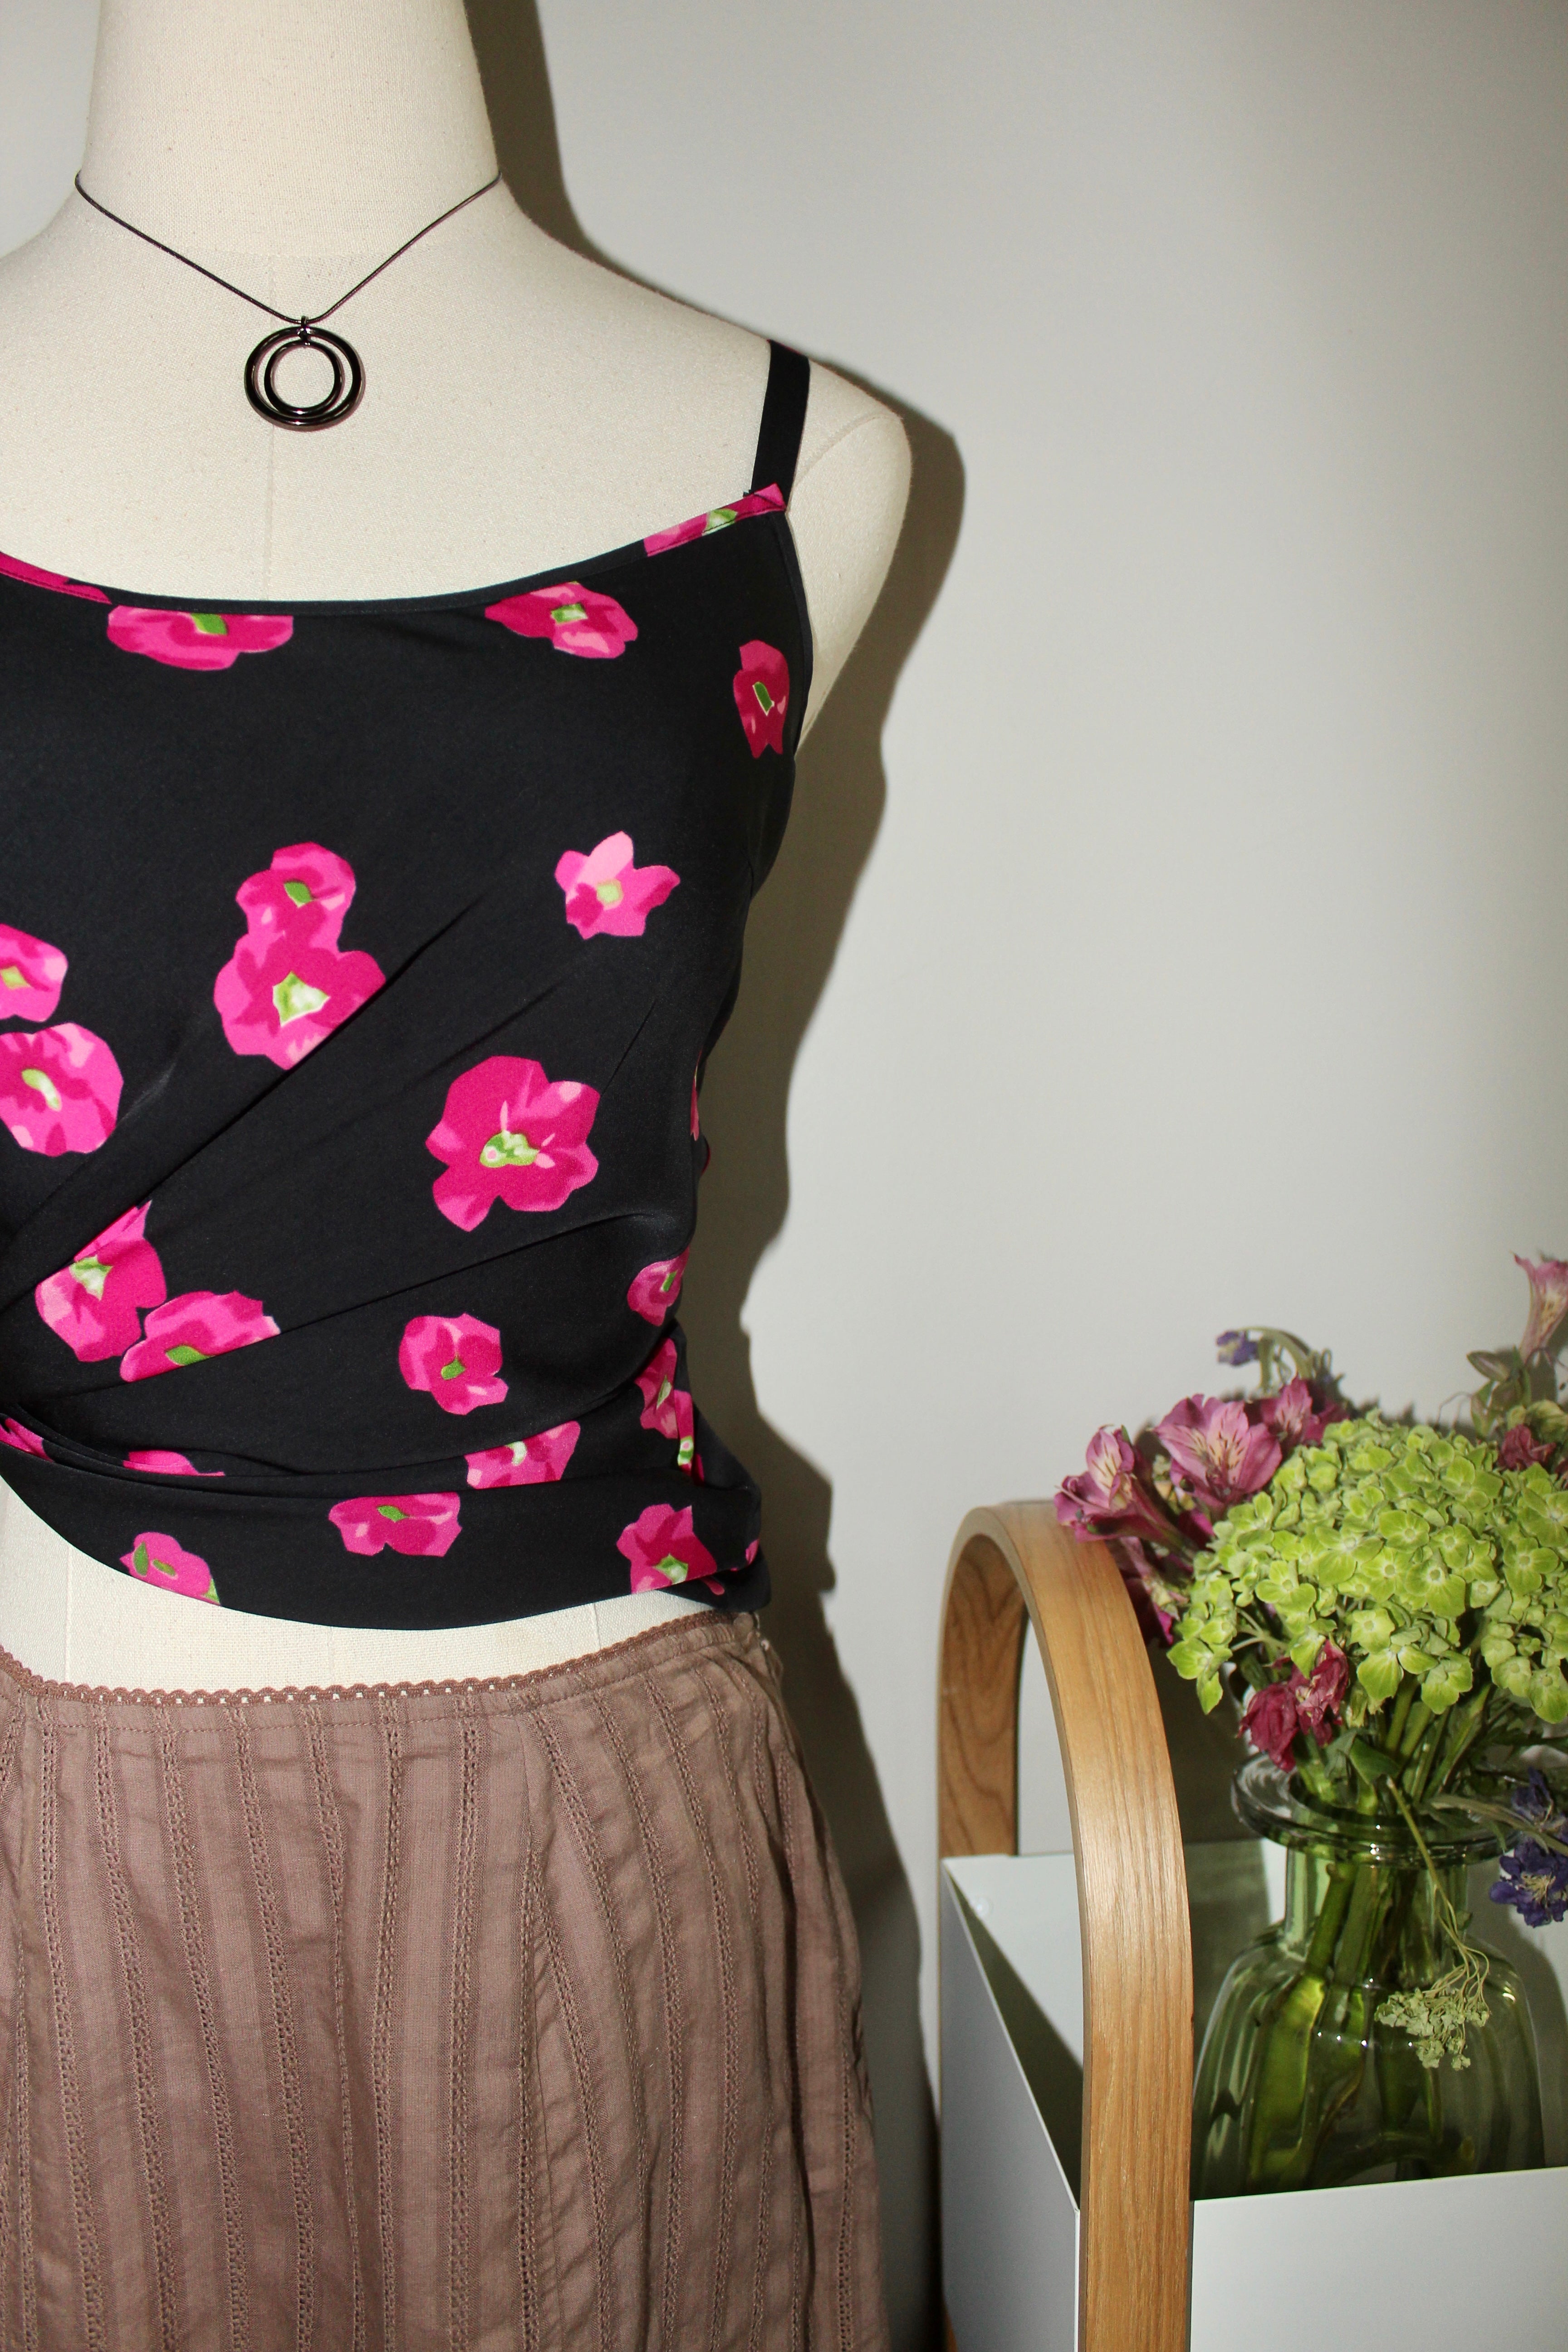 Retro DKNY Floral Camisole (S)